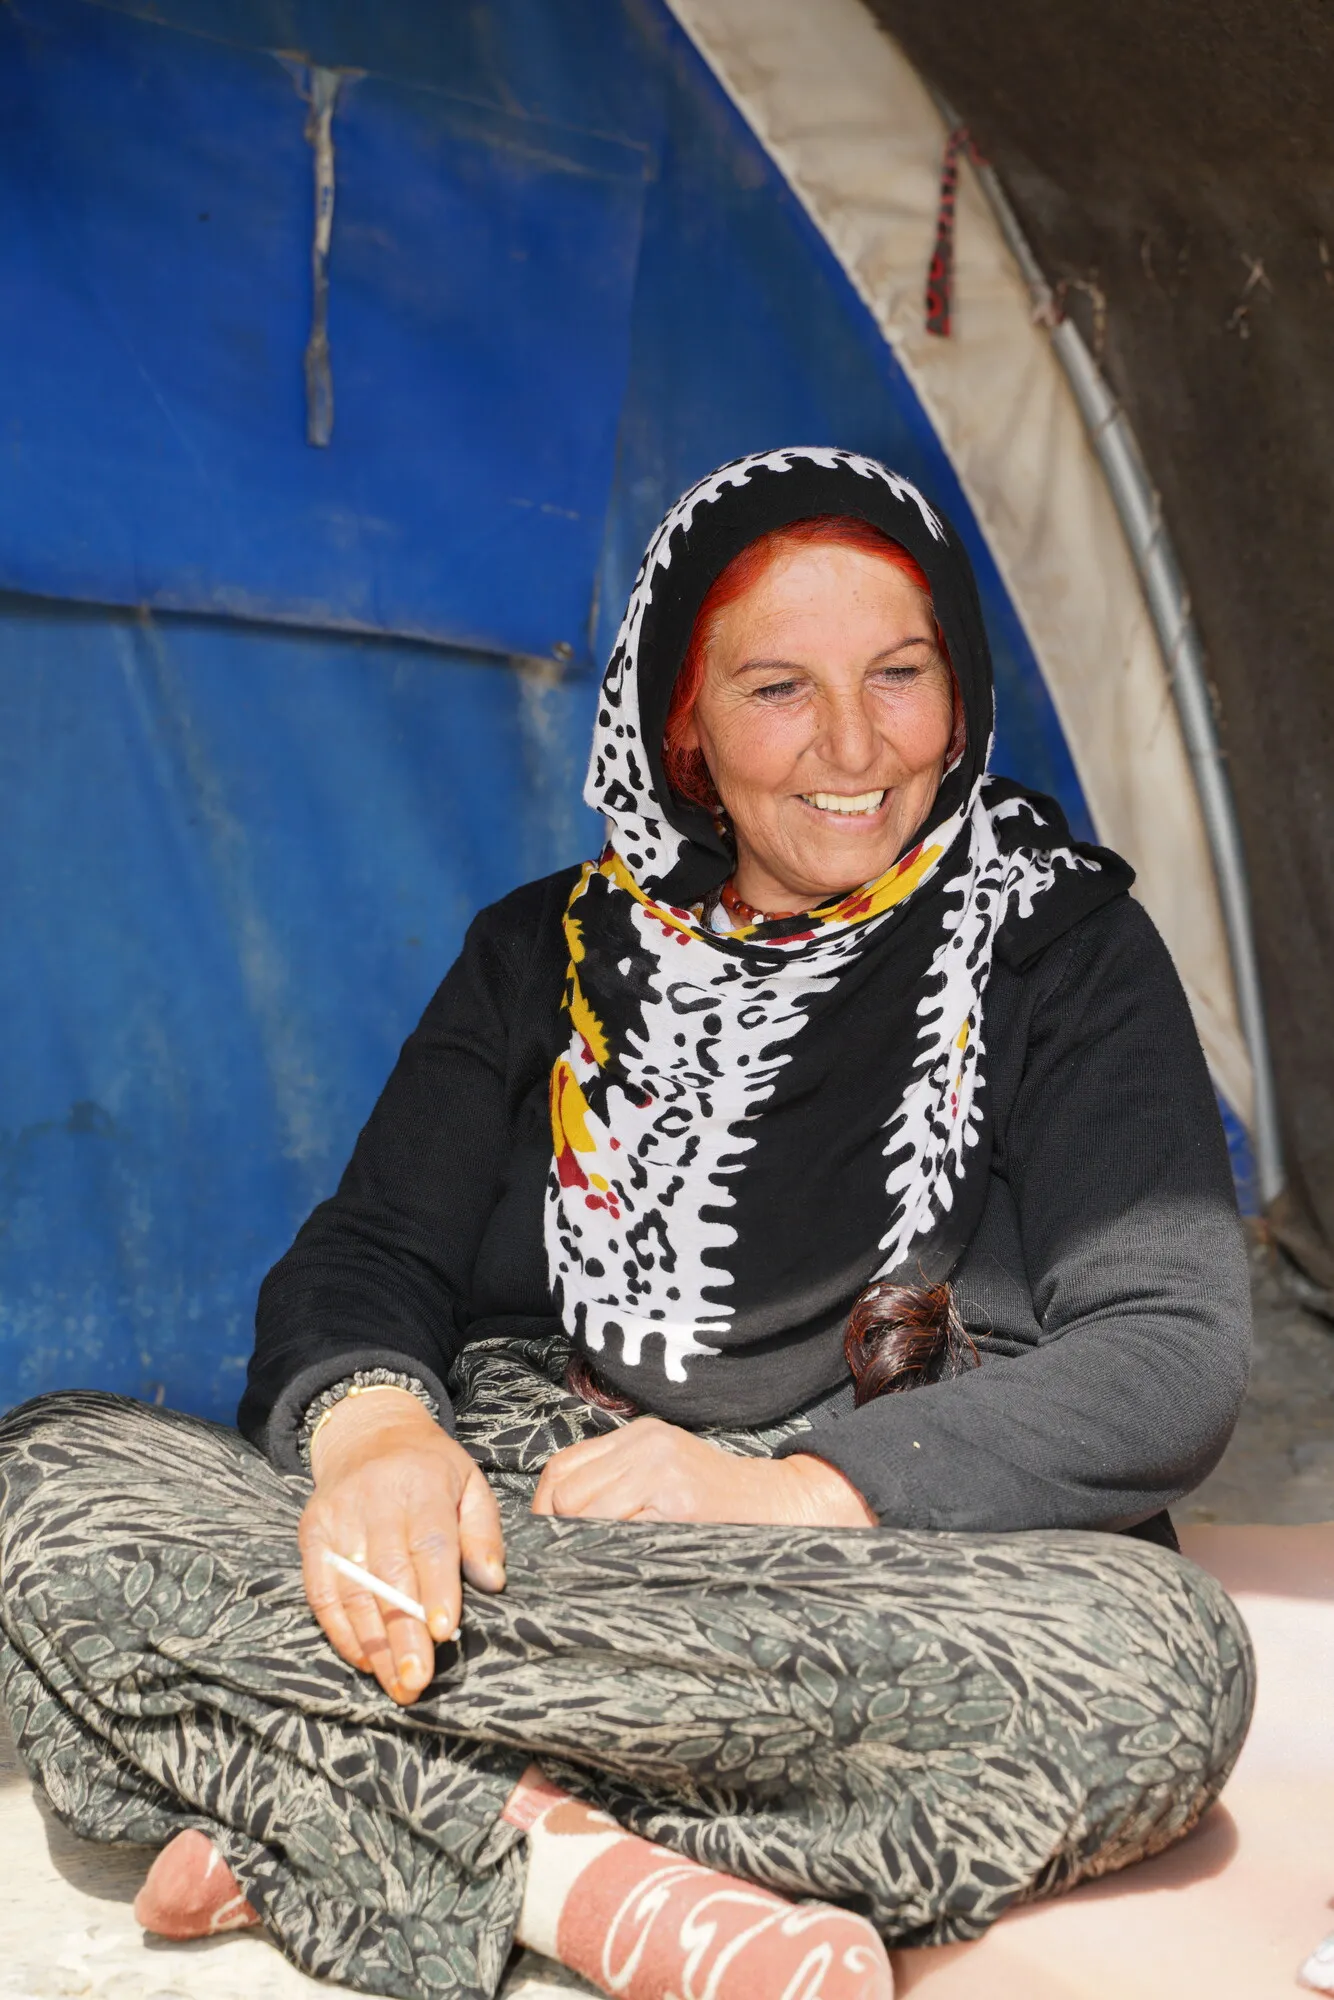 An internally displaced Syrian woman, smiling next to her tent.